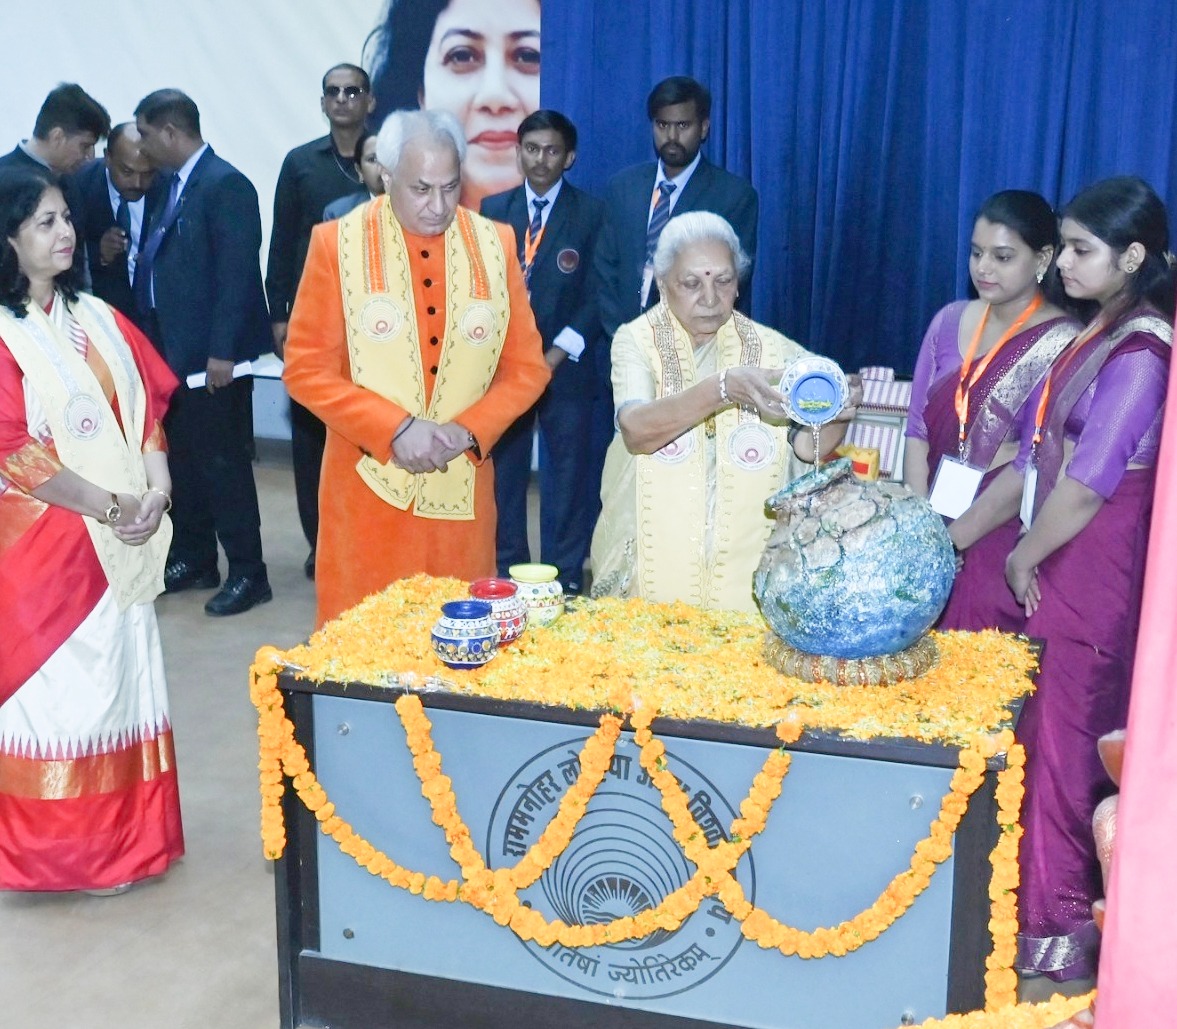 The 28th convocation ceremony of Dr. Ram Manohar Lohia Avadh University, Ayodhya concluded under the chairmanship of the Governor.